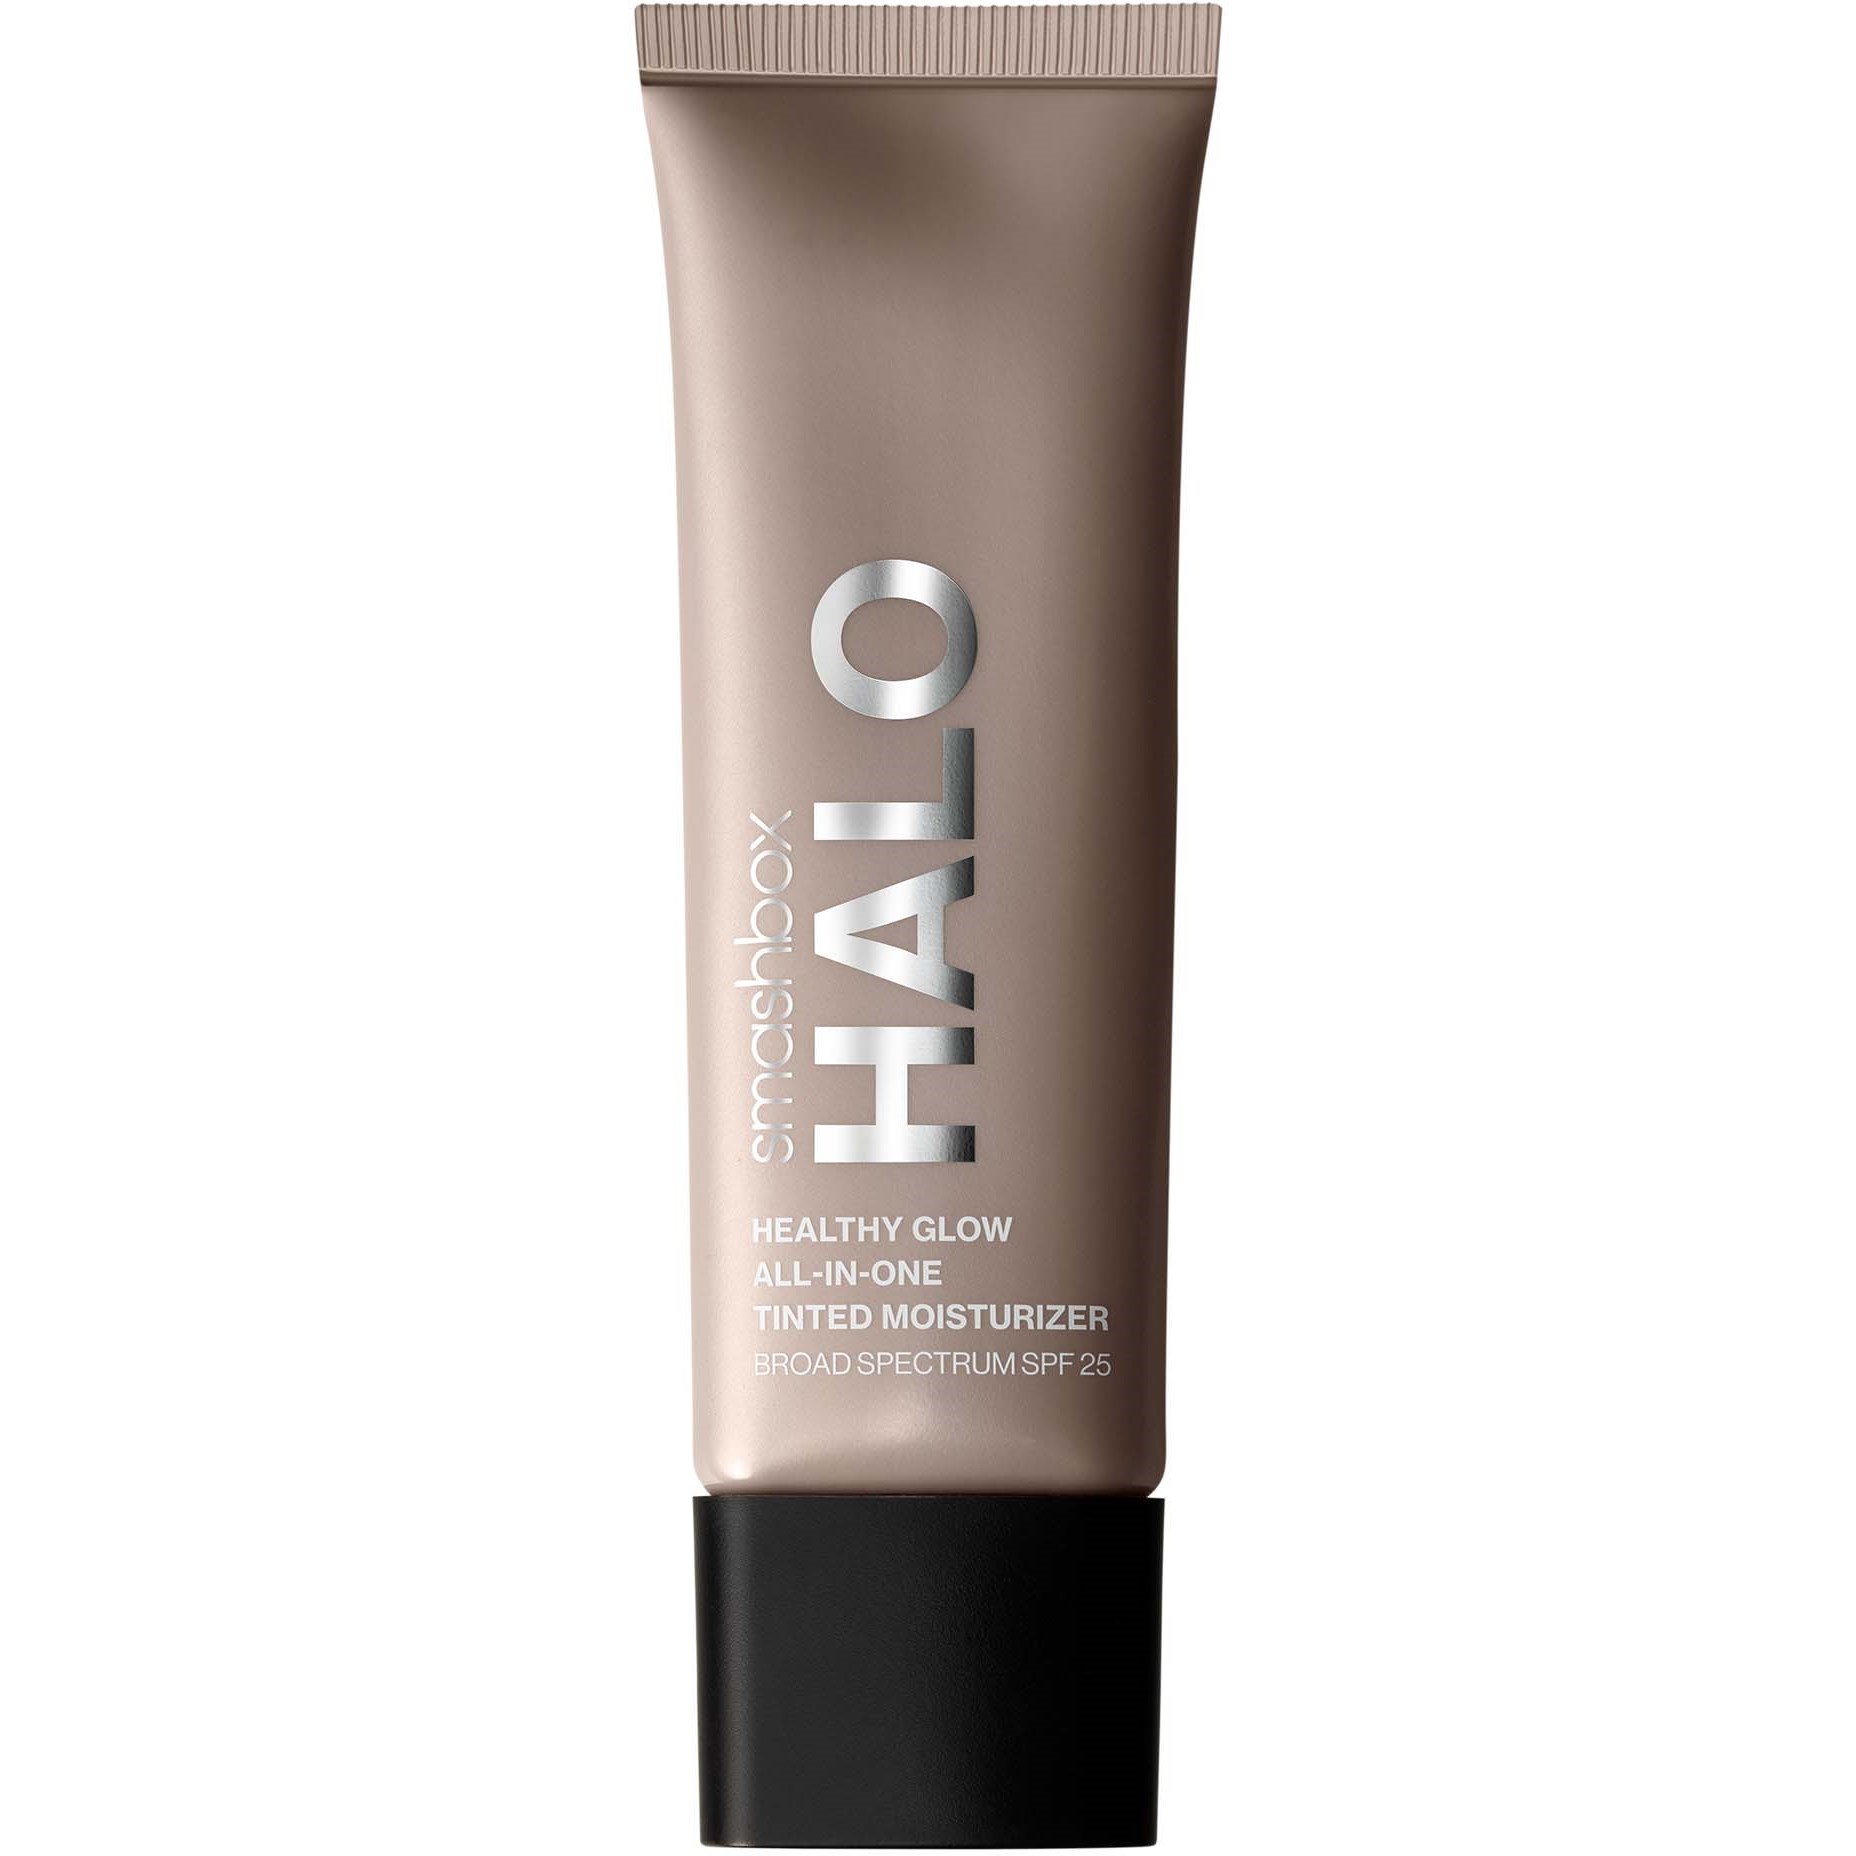 Smashbox Halo Healthy Glow All-In-One Tinted Moisturizer SPF 25 Fair L